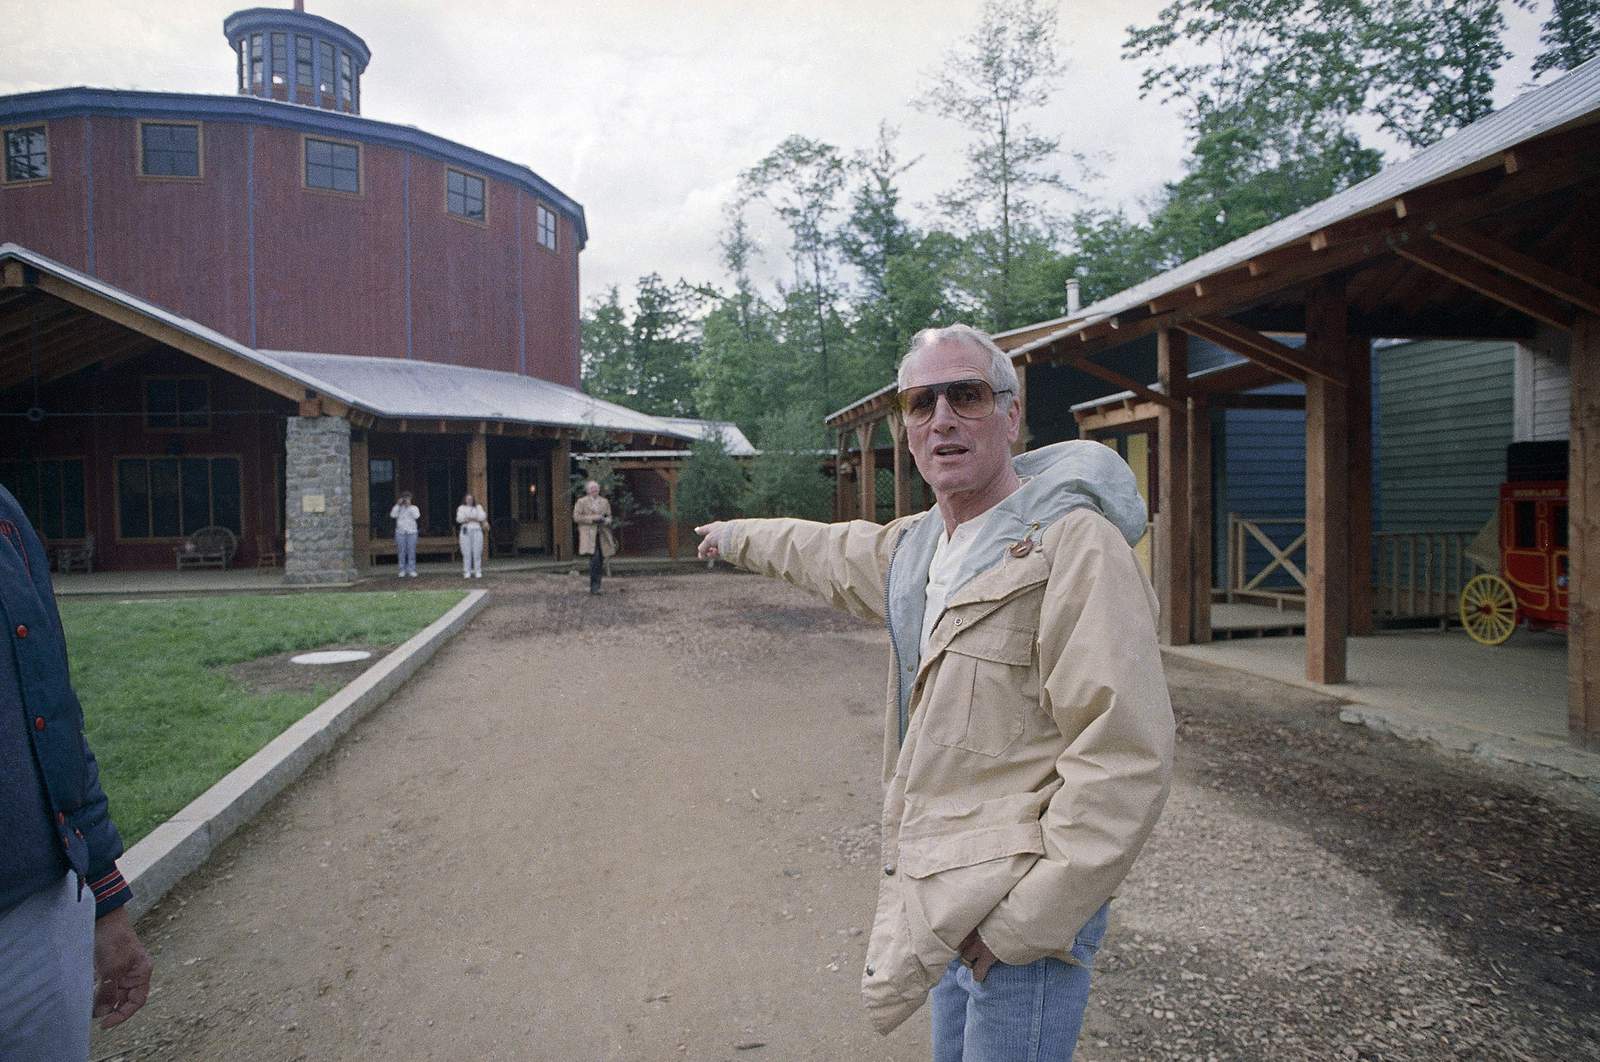 Fire destroys part of Paul Newman's camp for ill children